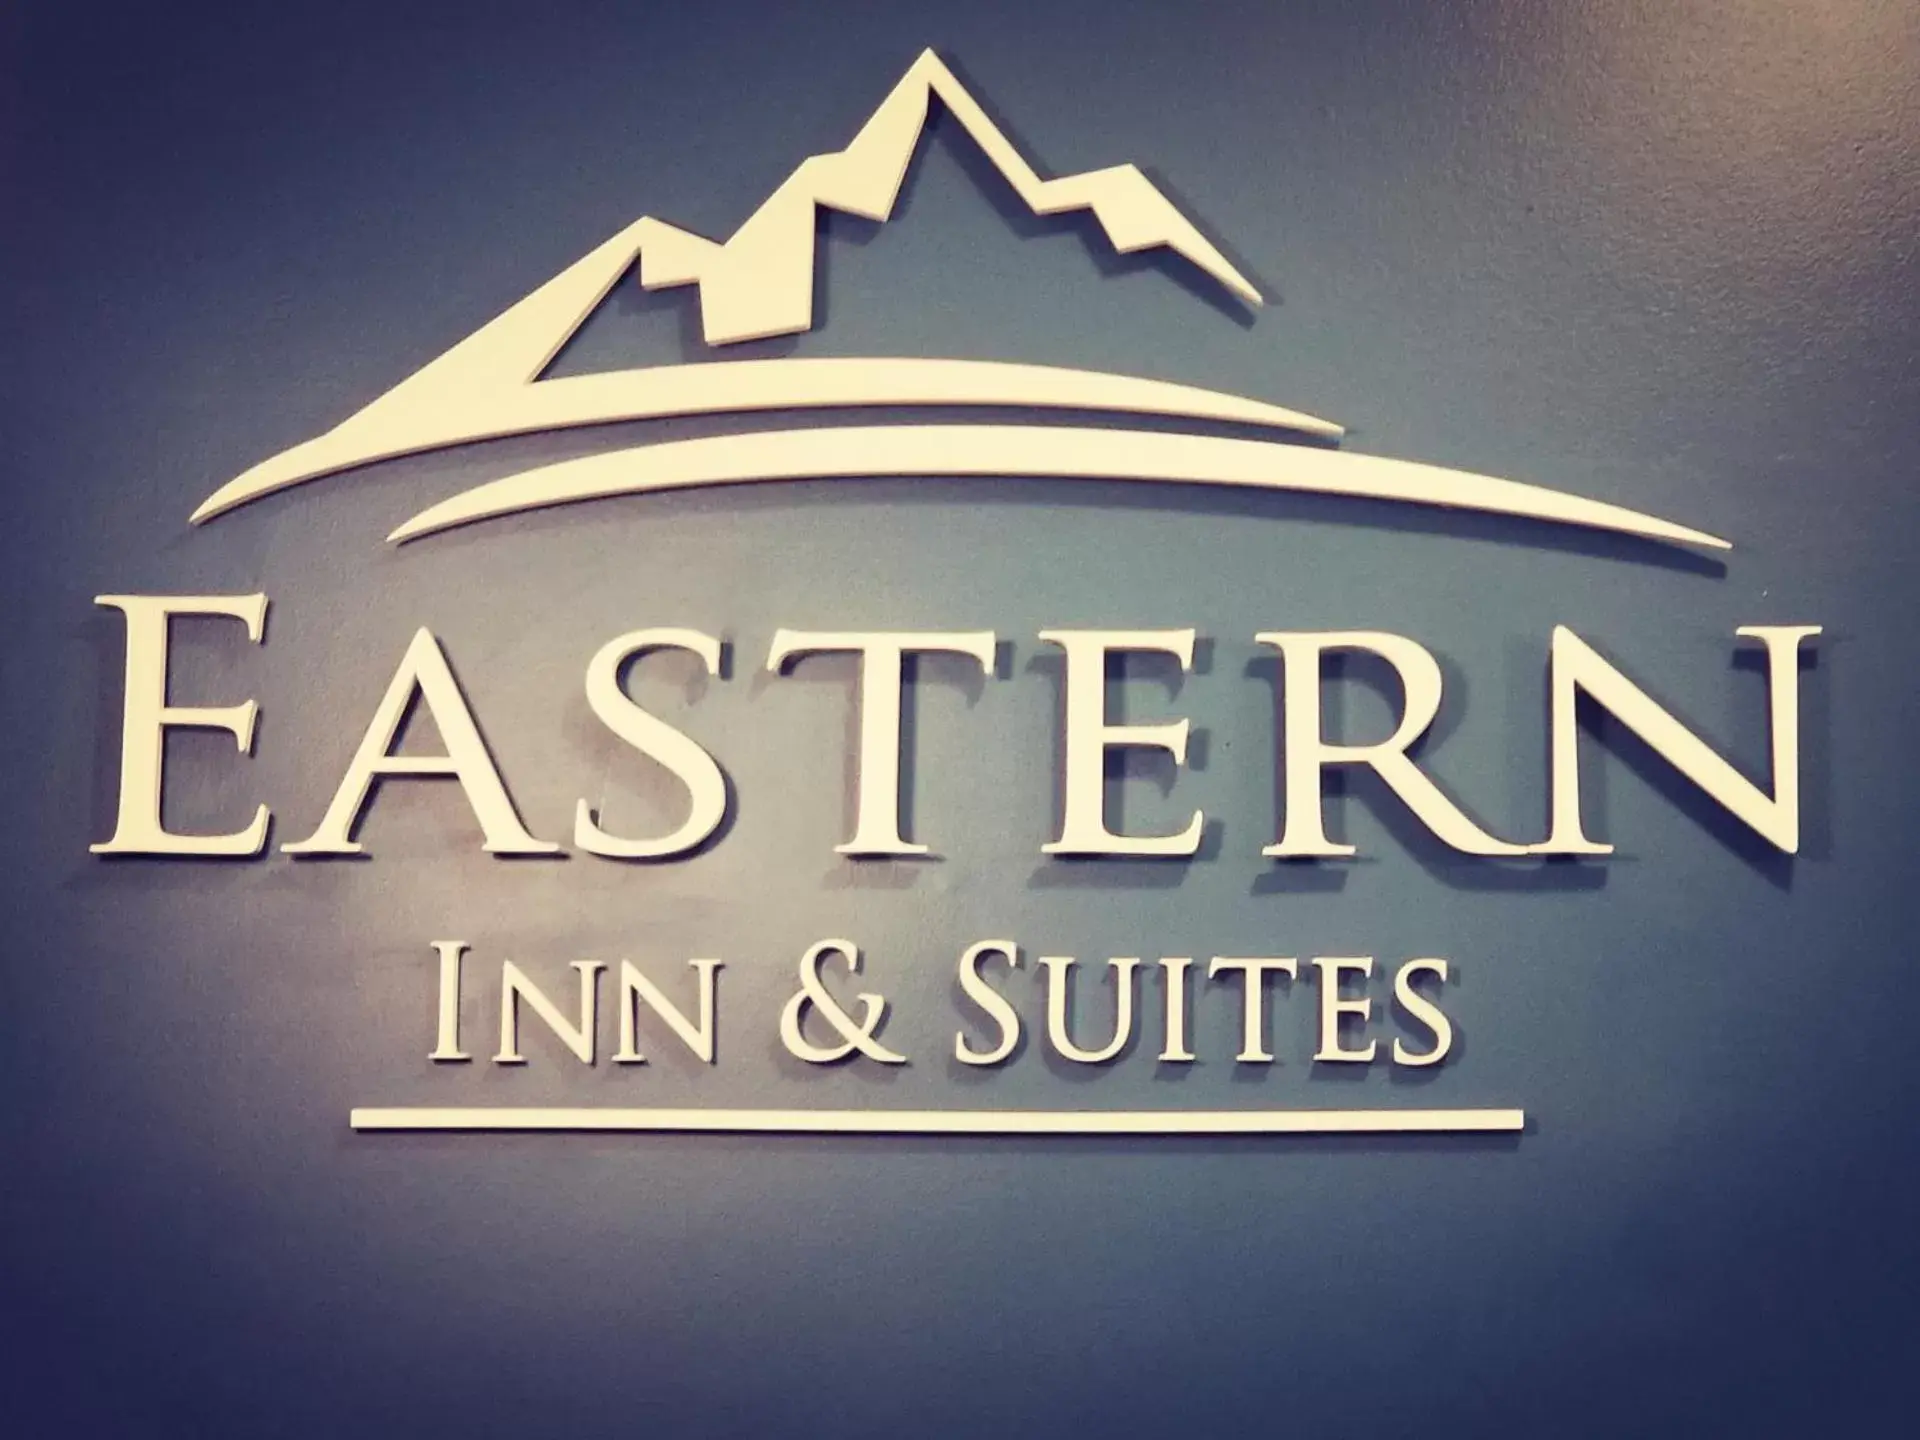 Property logo or sign, Property Logo/Sign in Eastern Inn & Suites (formerly Eastern Inns)